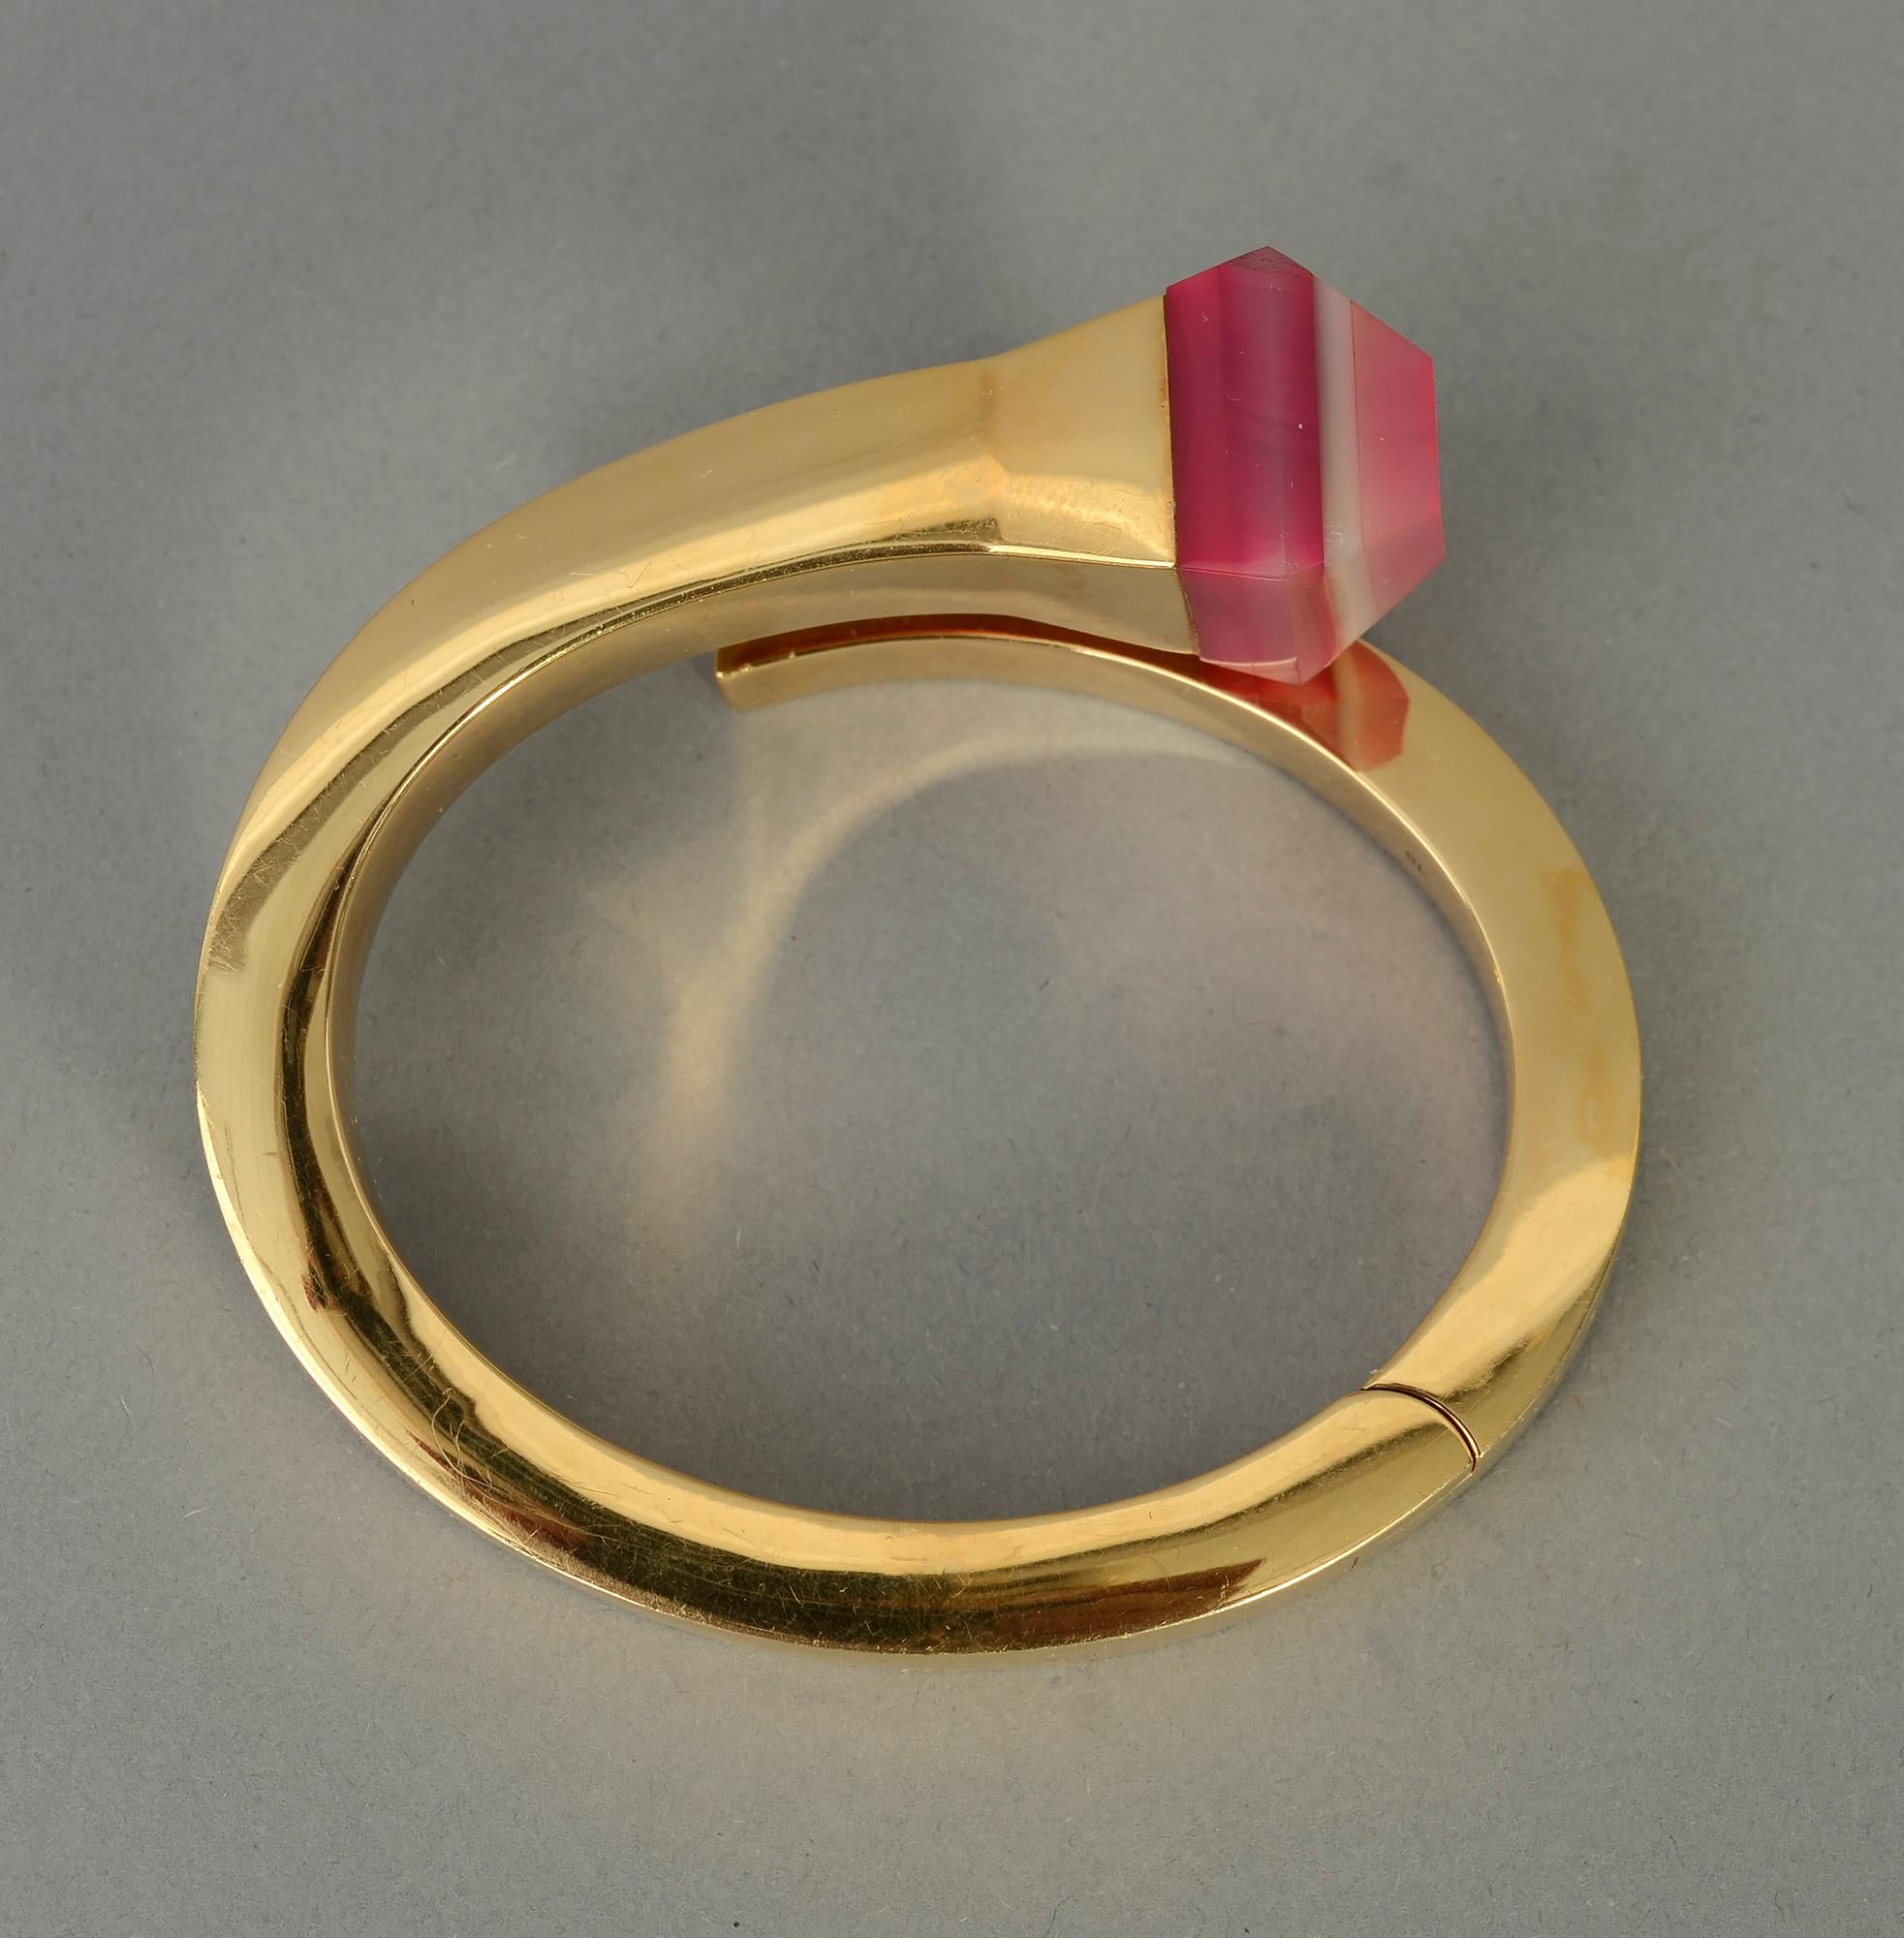 Stunning and most unusual gold nail bracelet by Gucci with a pink agate tip. The stone is pyramid shaped and measures 3/4